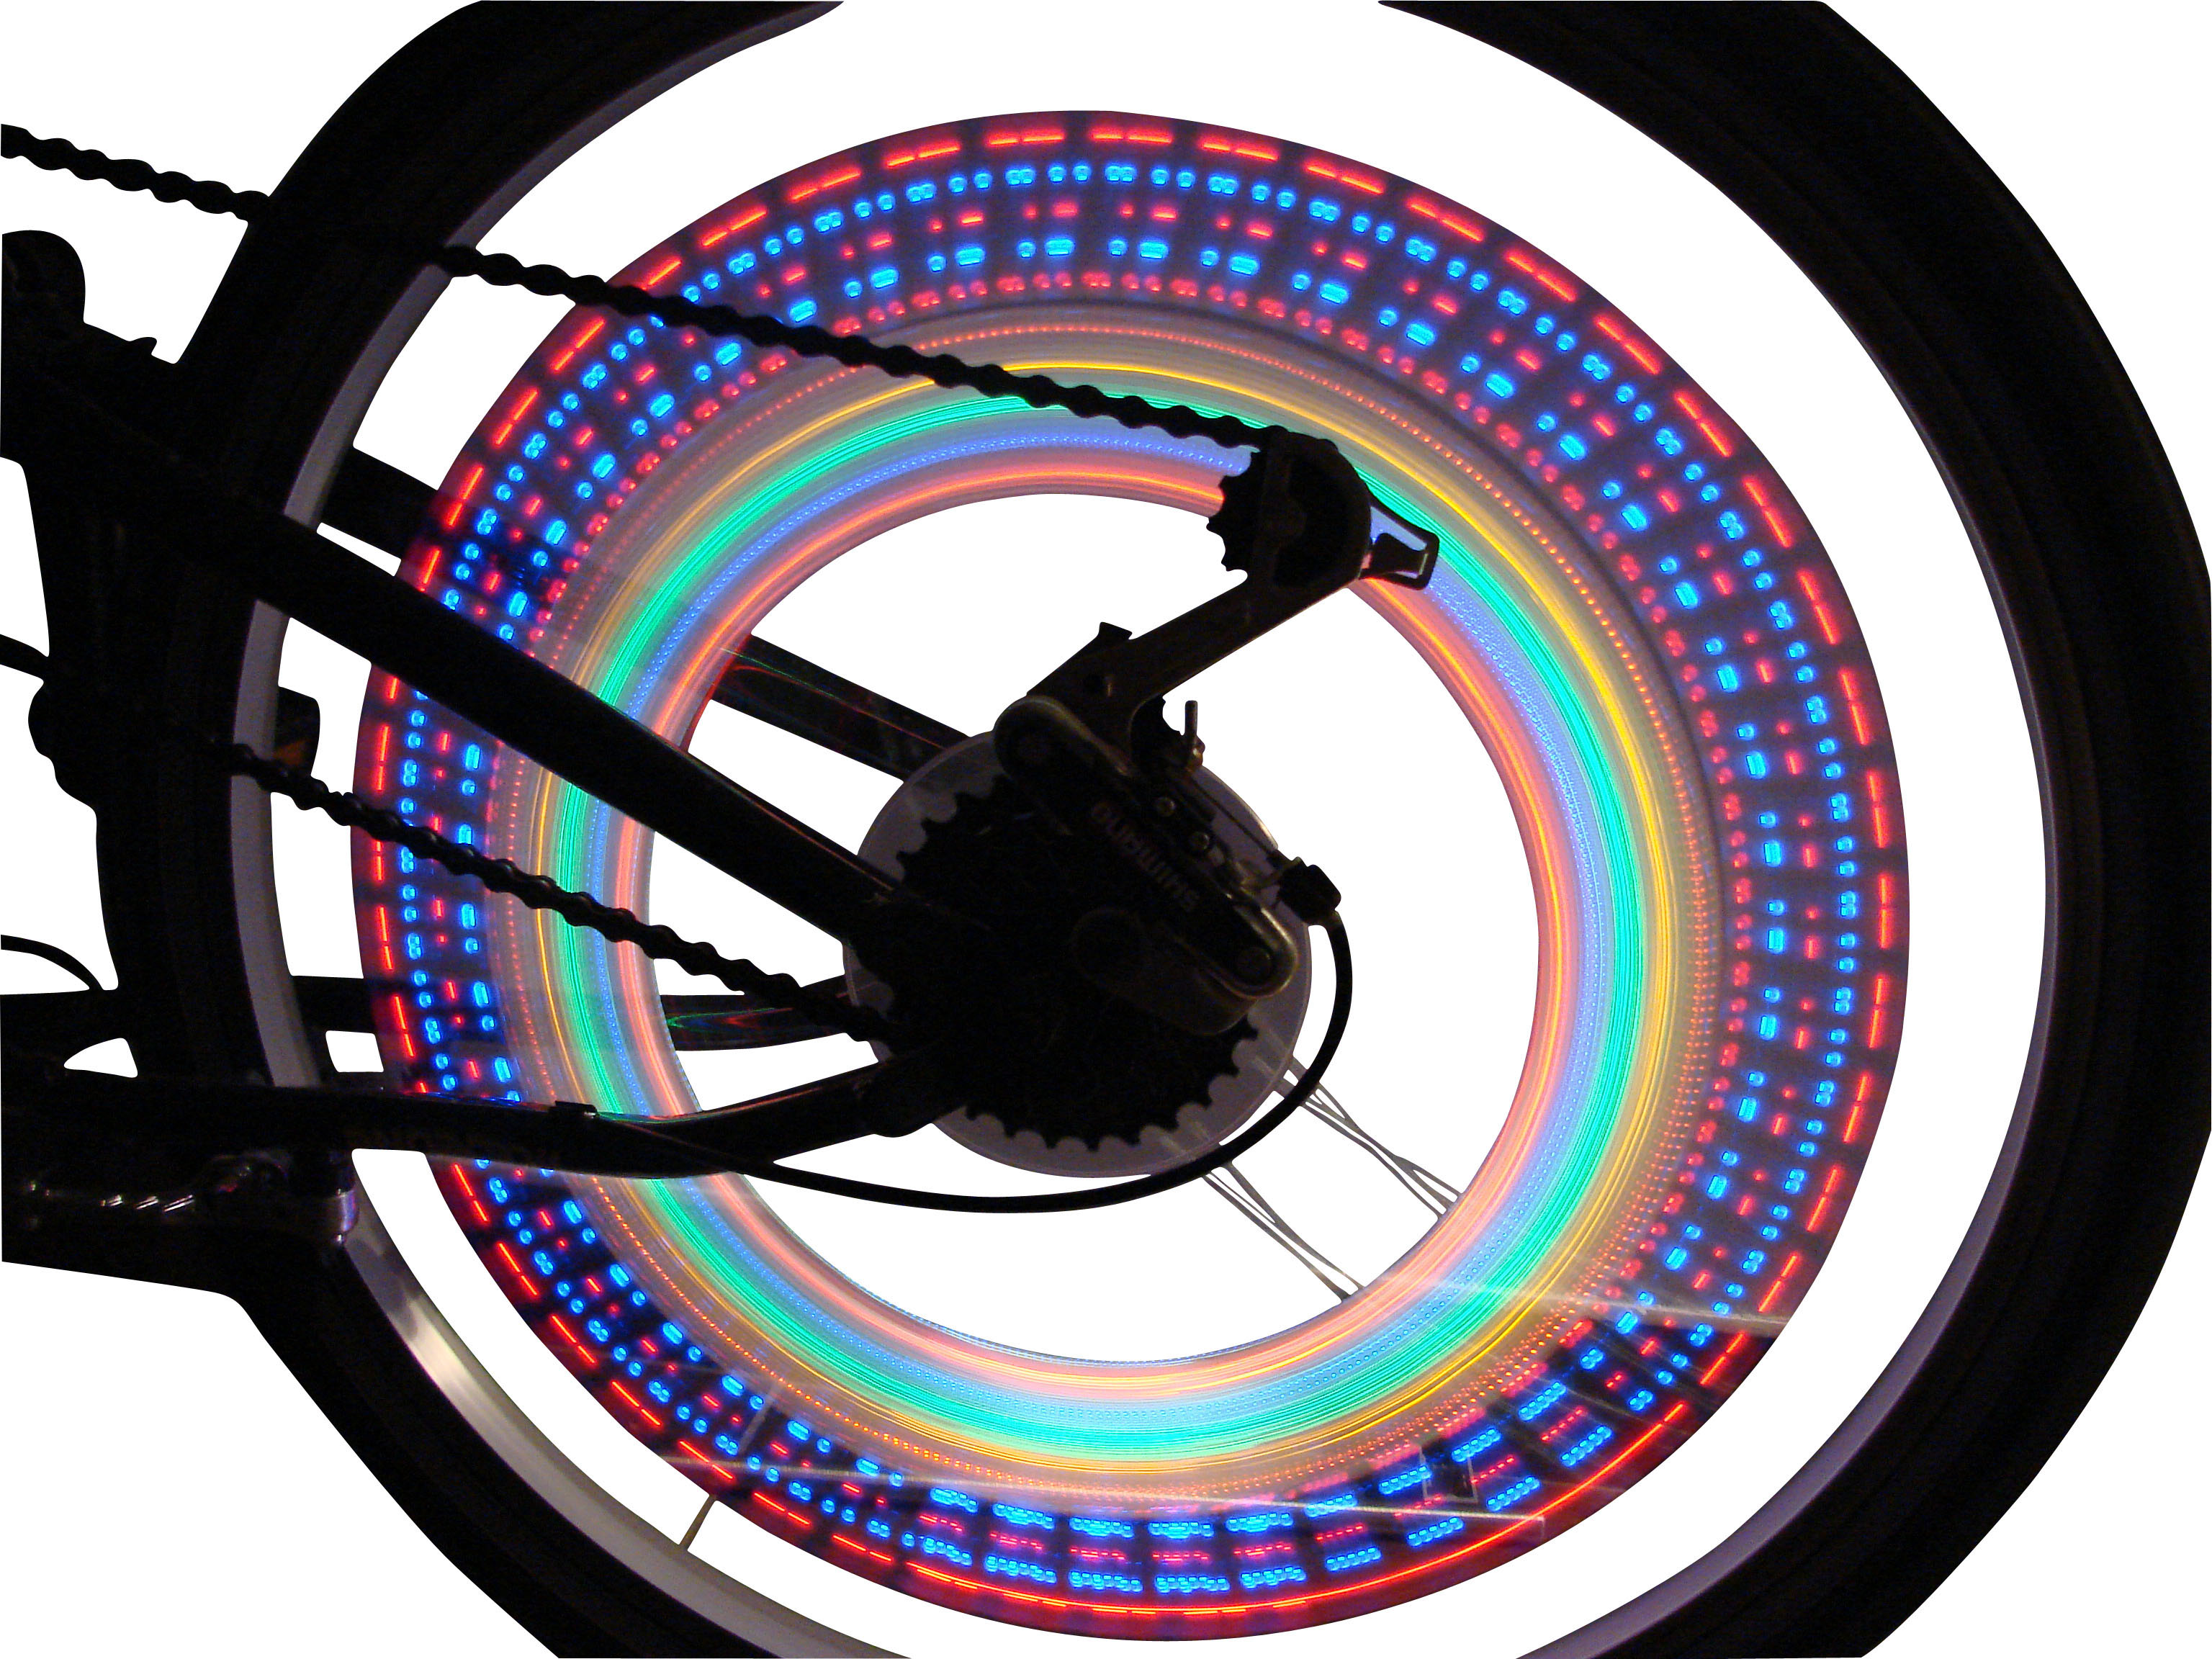 Luminous shapes on rear wheel of bicycle